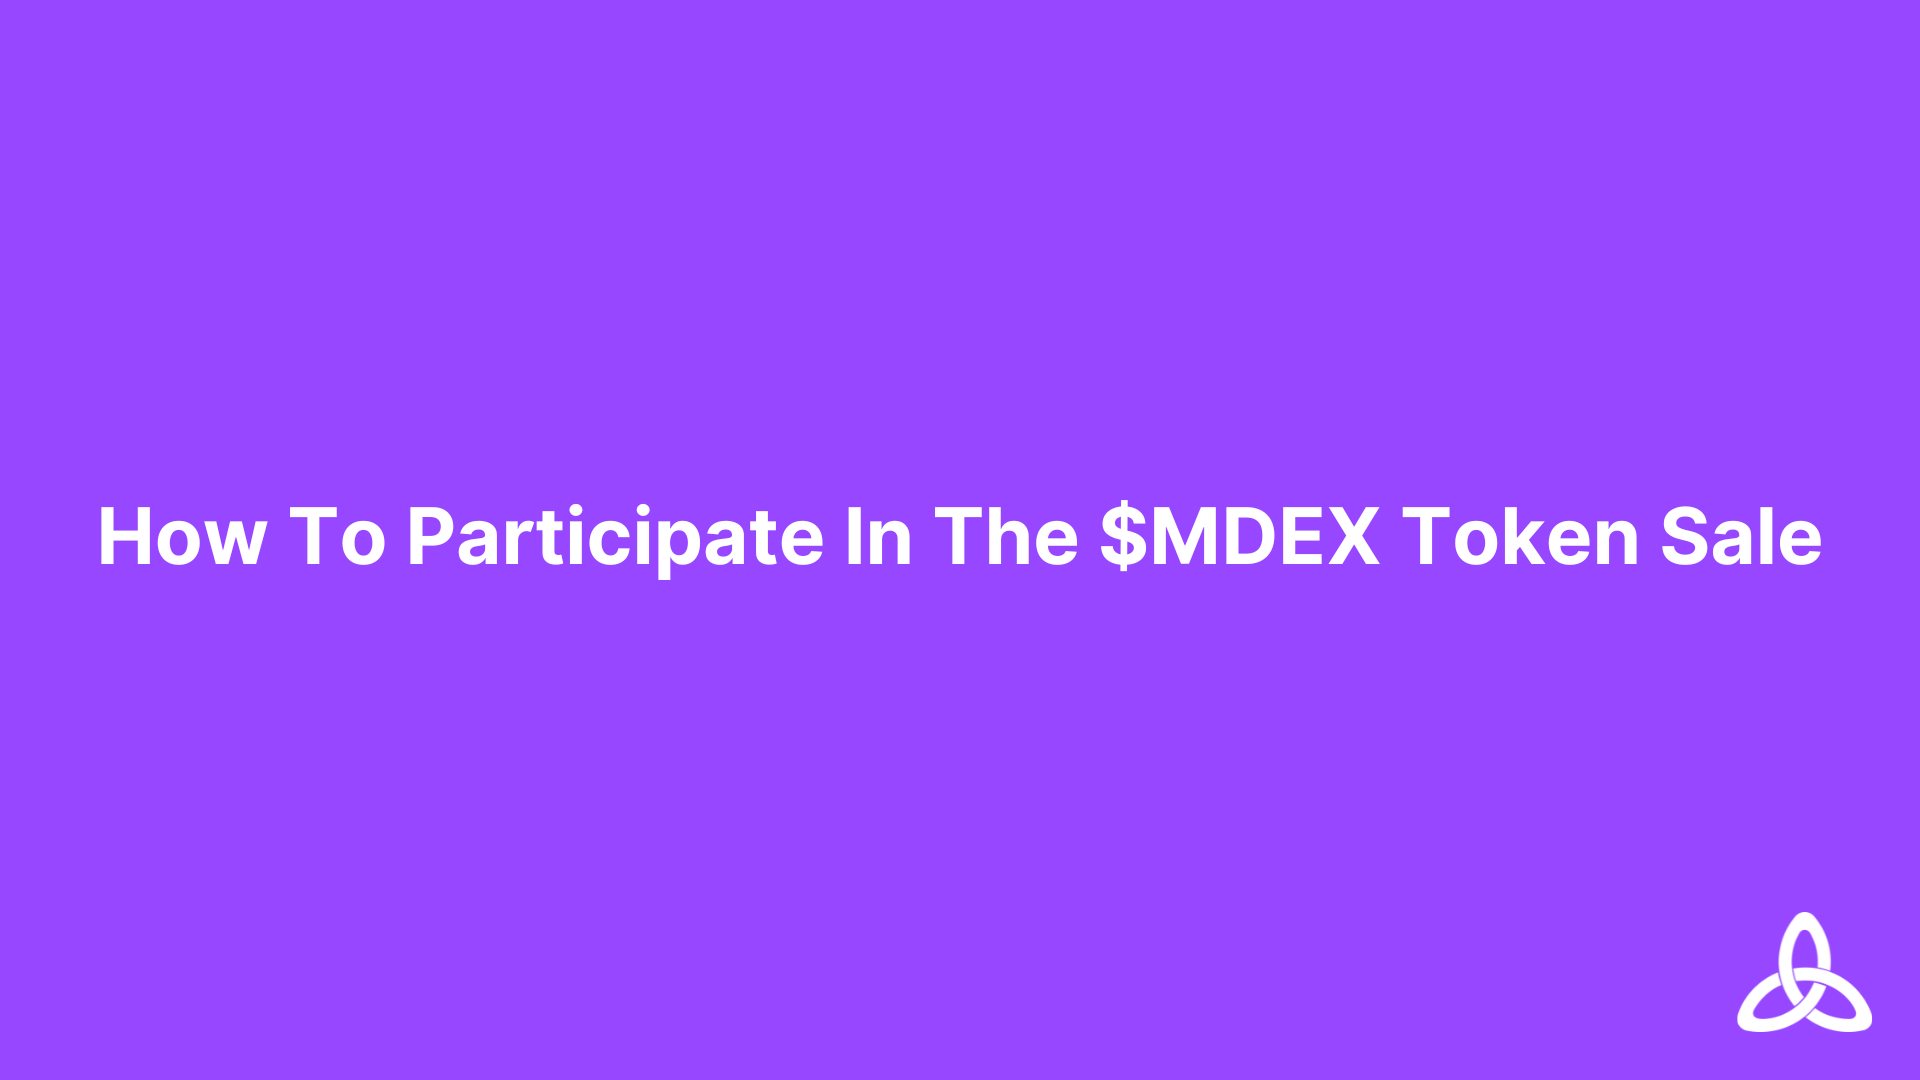 How To Participate In The $MDEX Token Sale